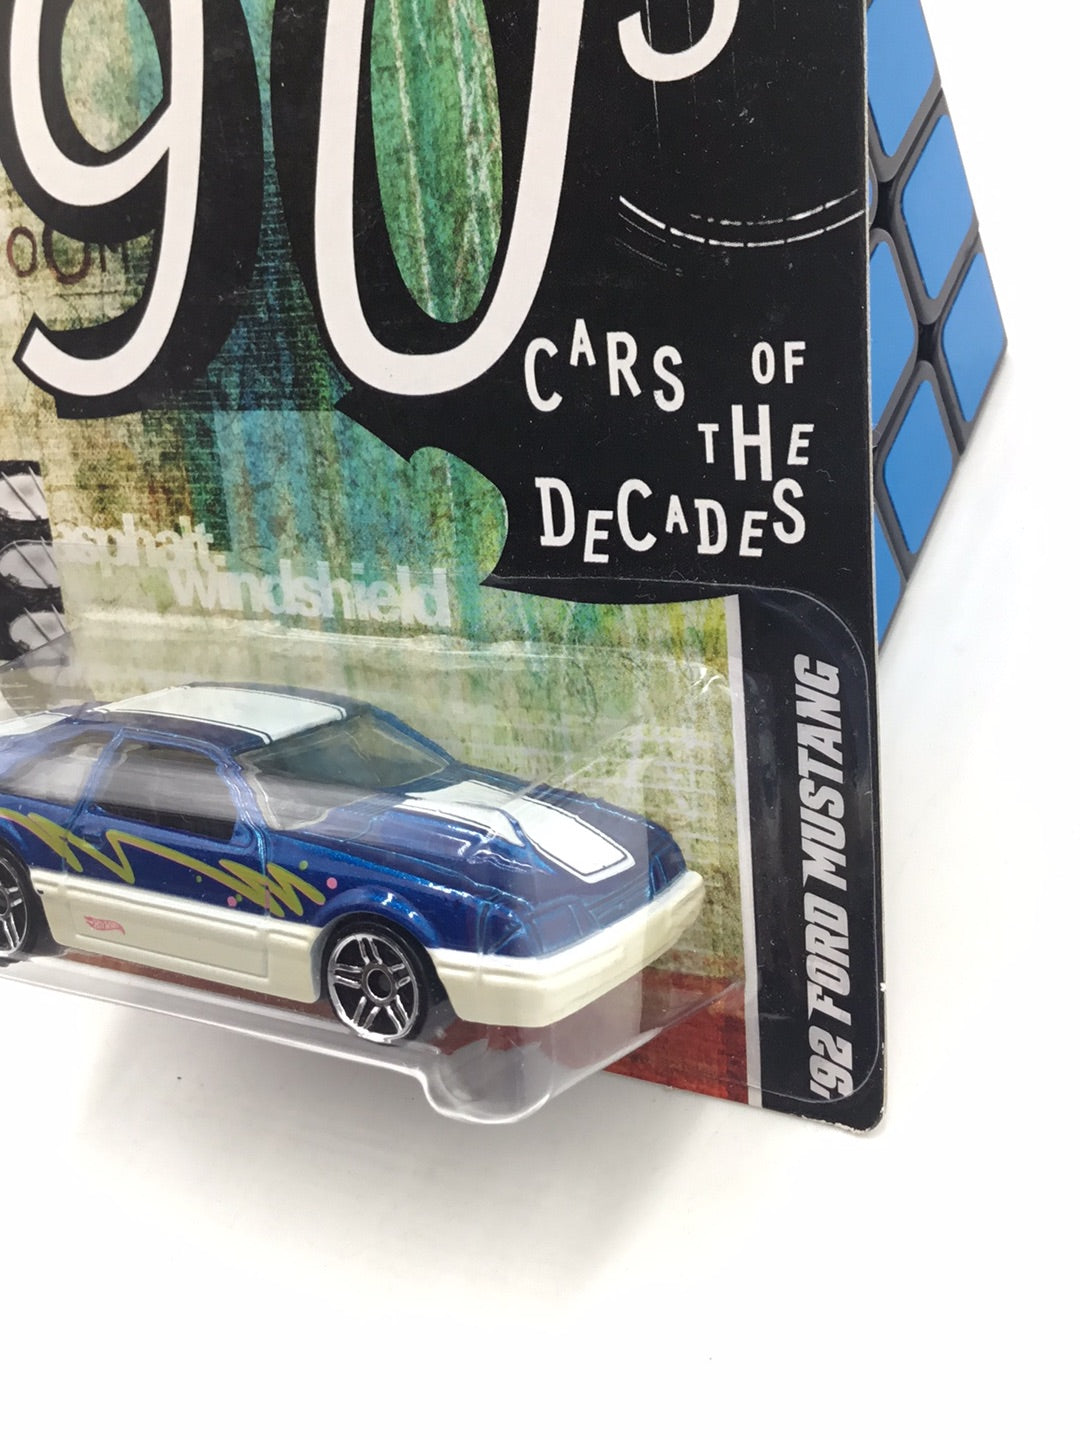 Hot wheels cars of the decades #25 1992 Ford Mustang with protector